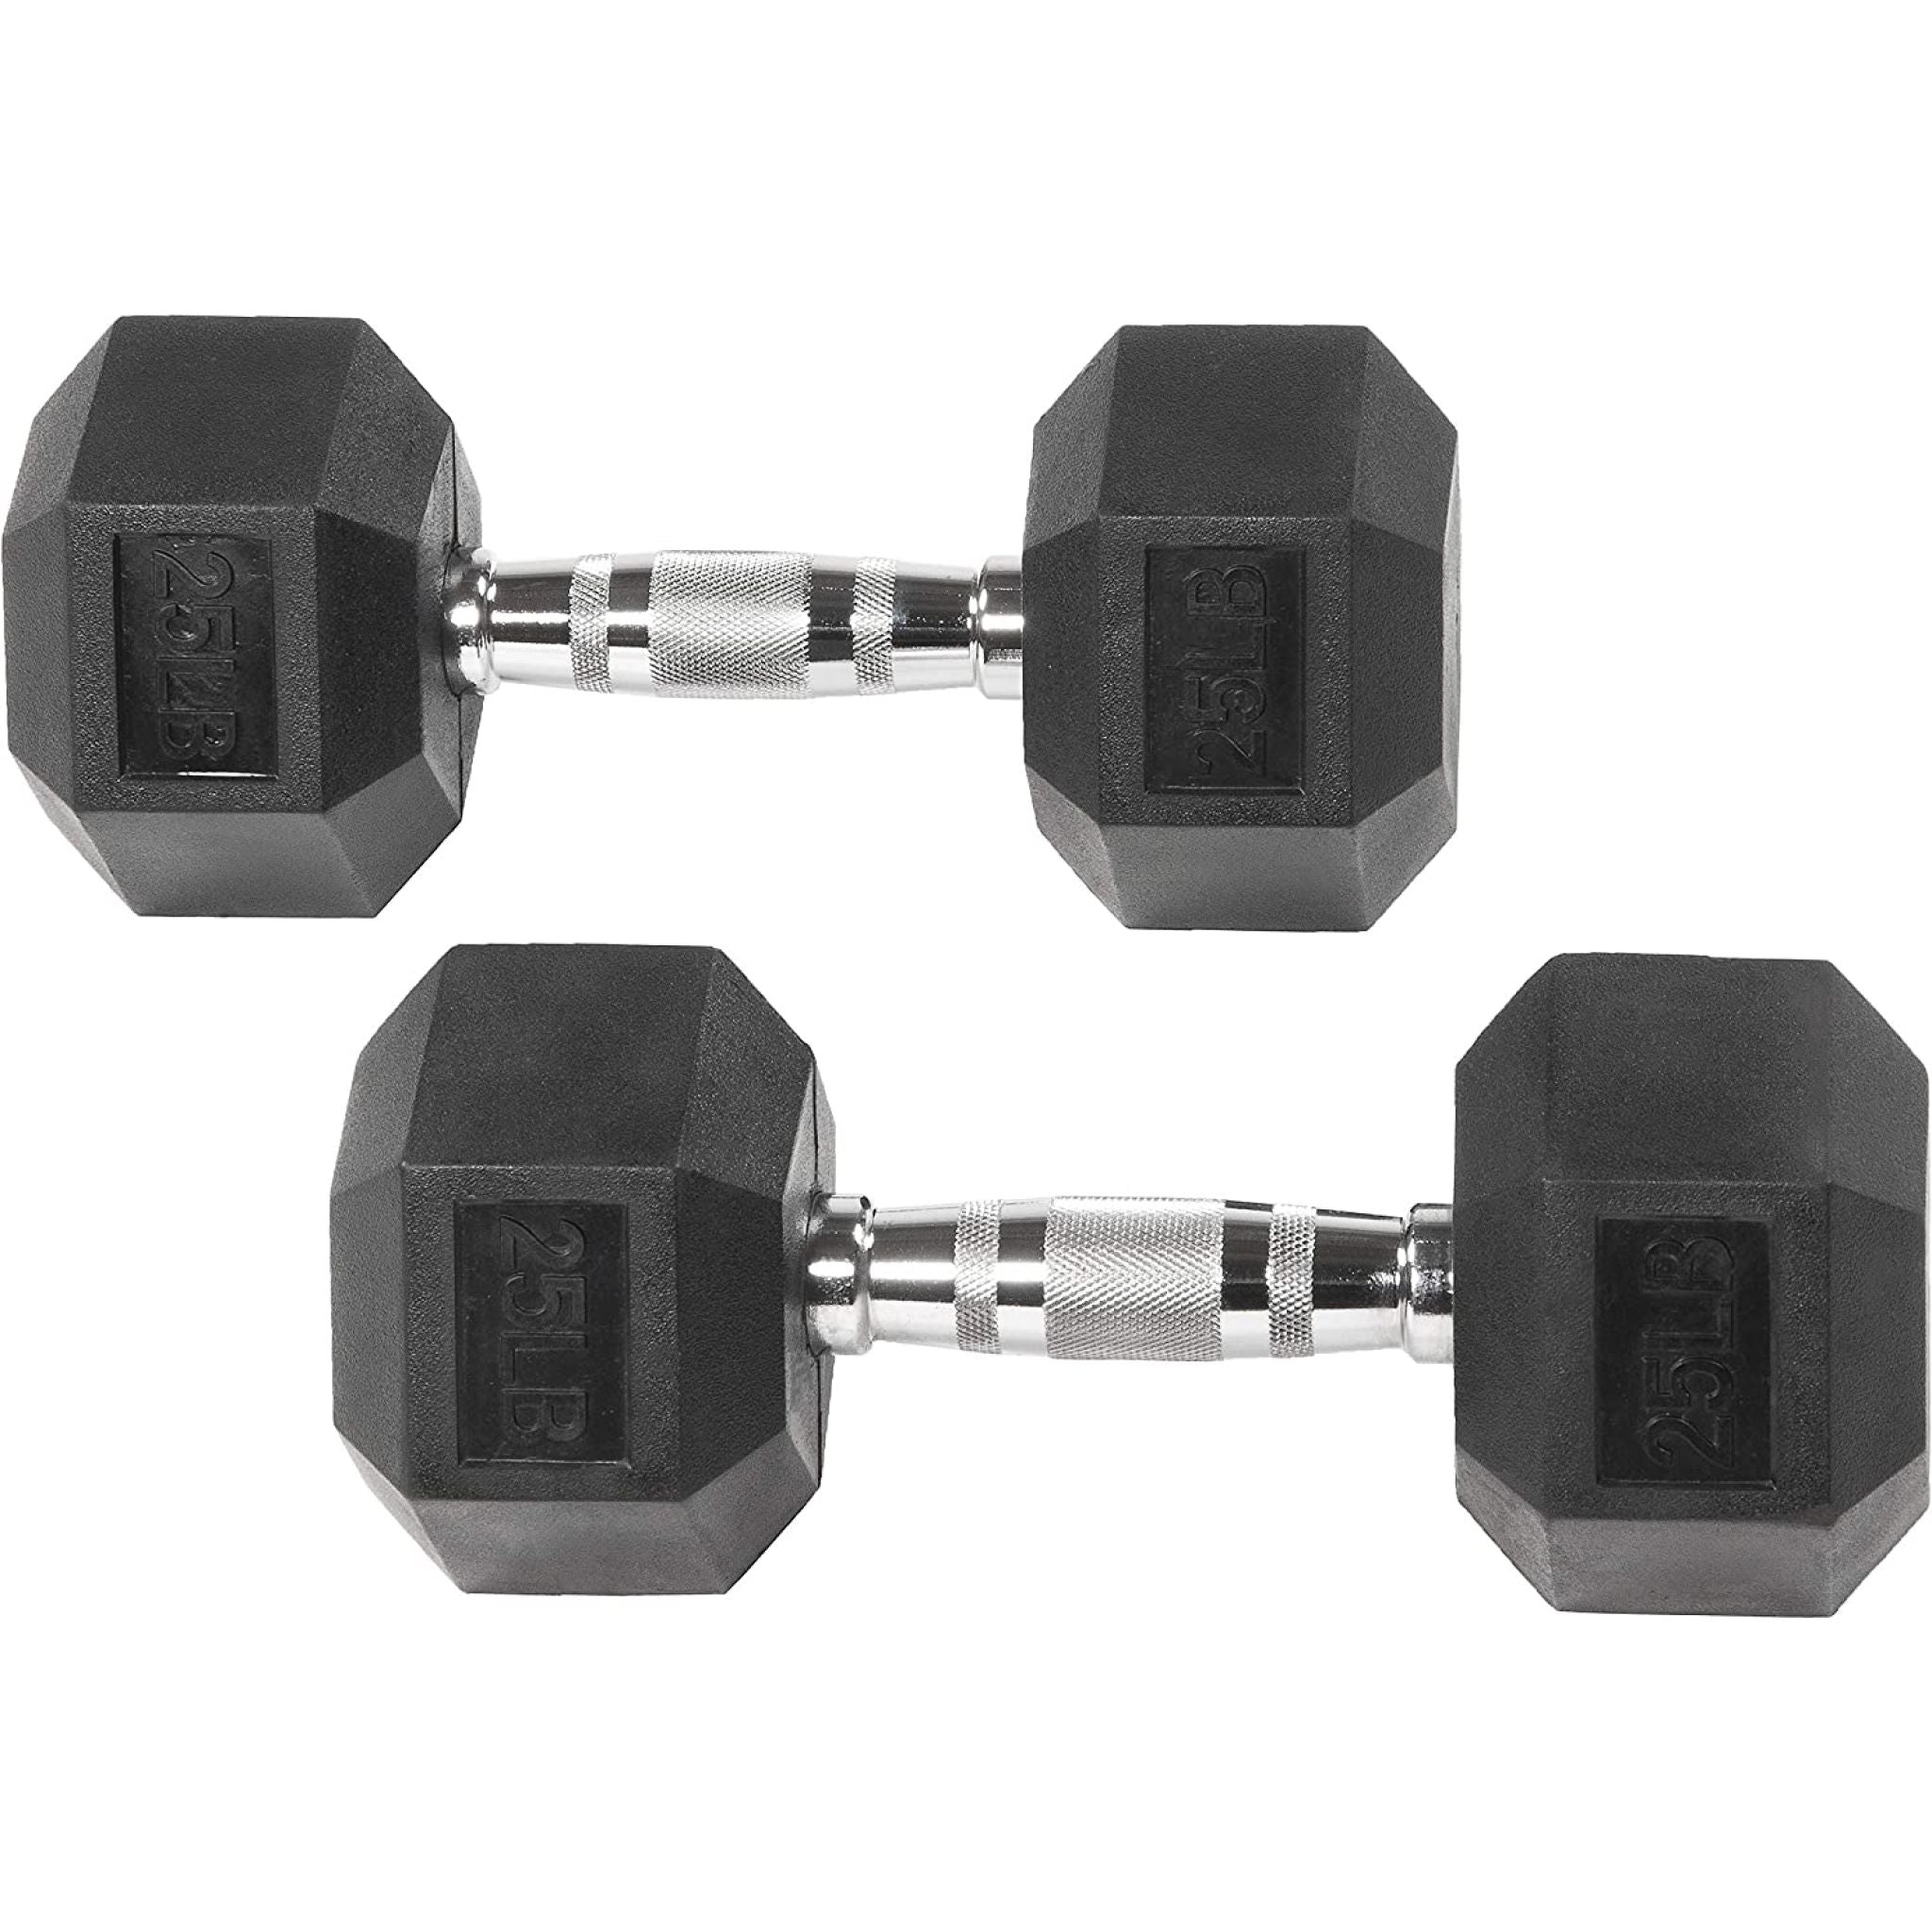 25Lb rubber hex dumbbells pair at Express Gym Supply